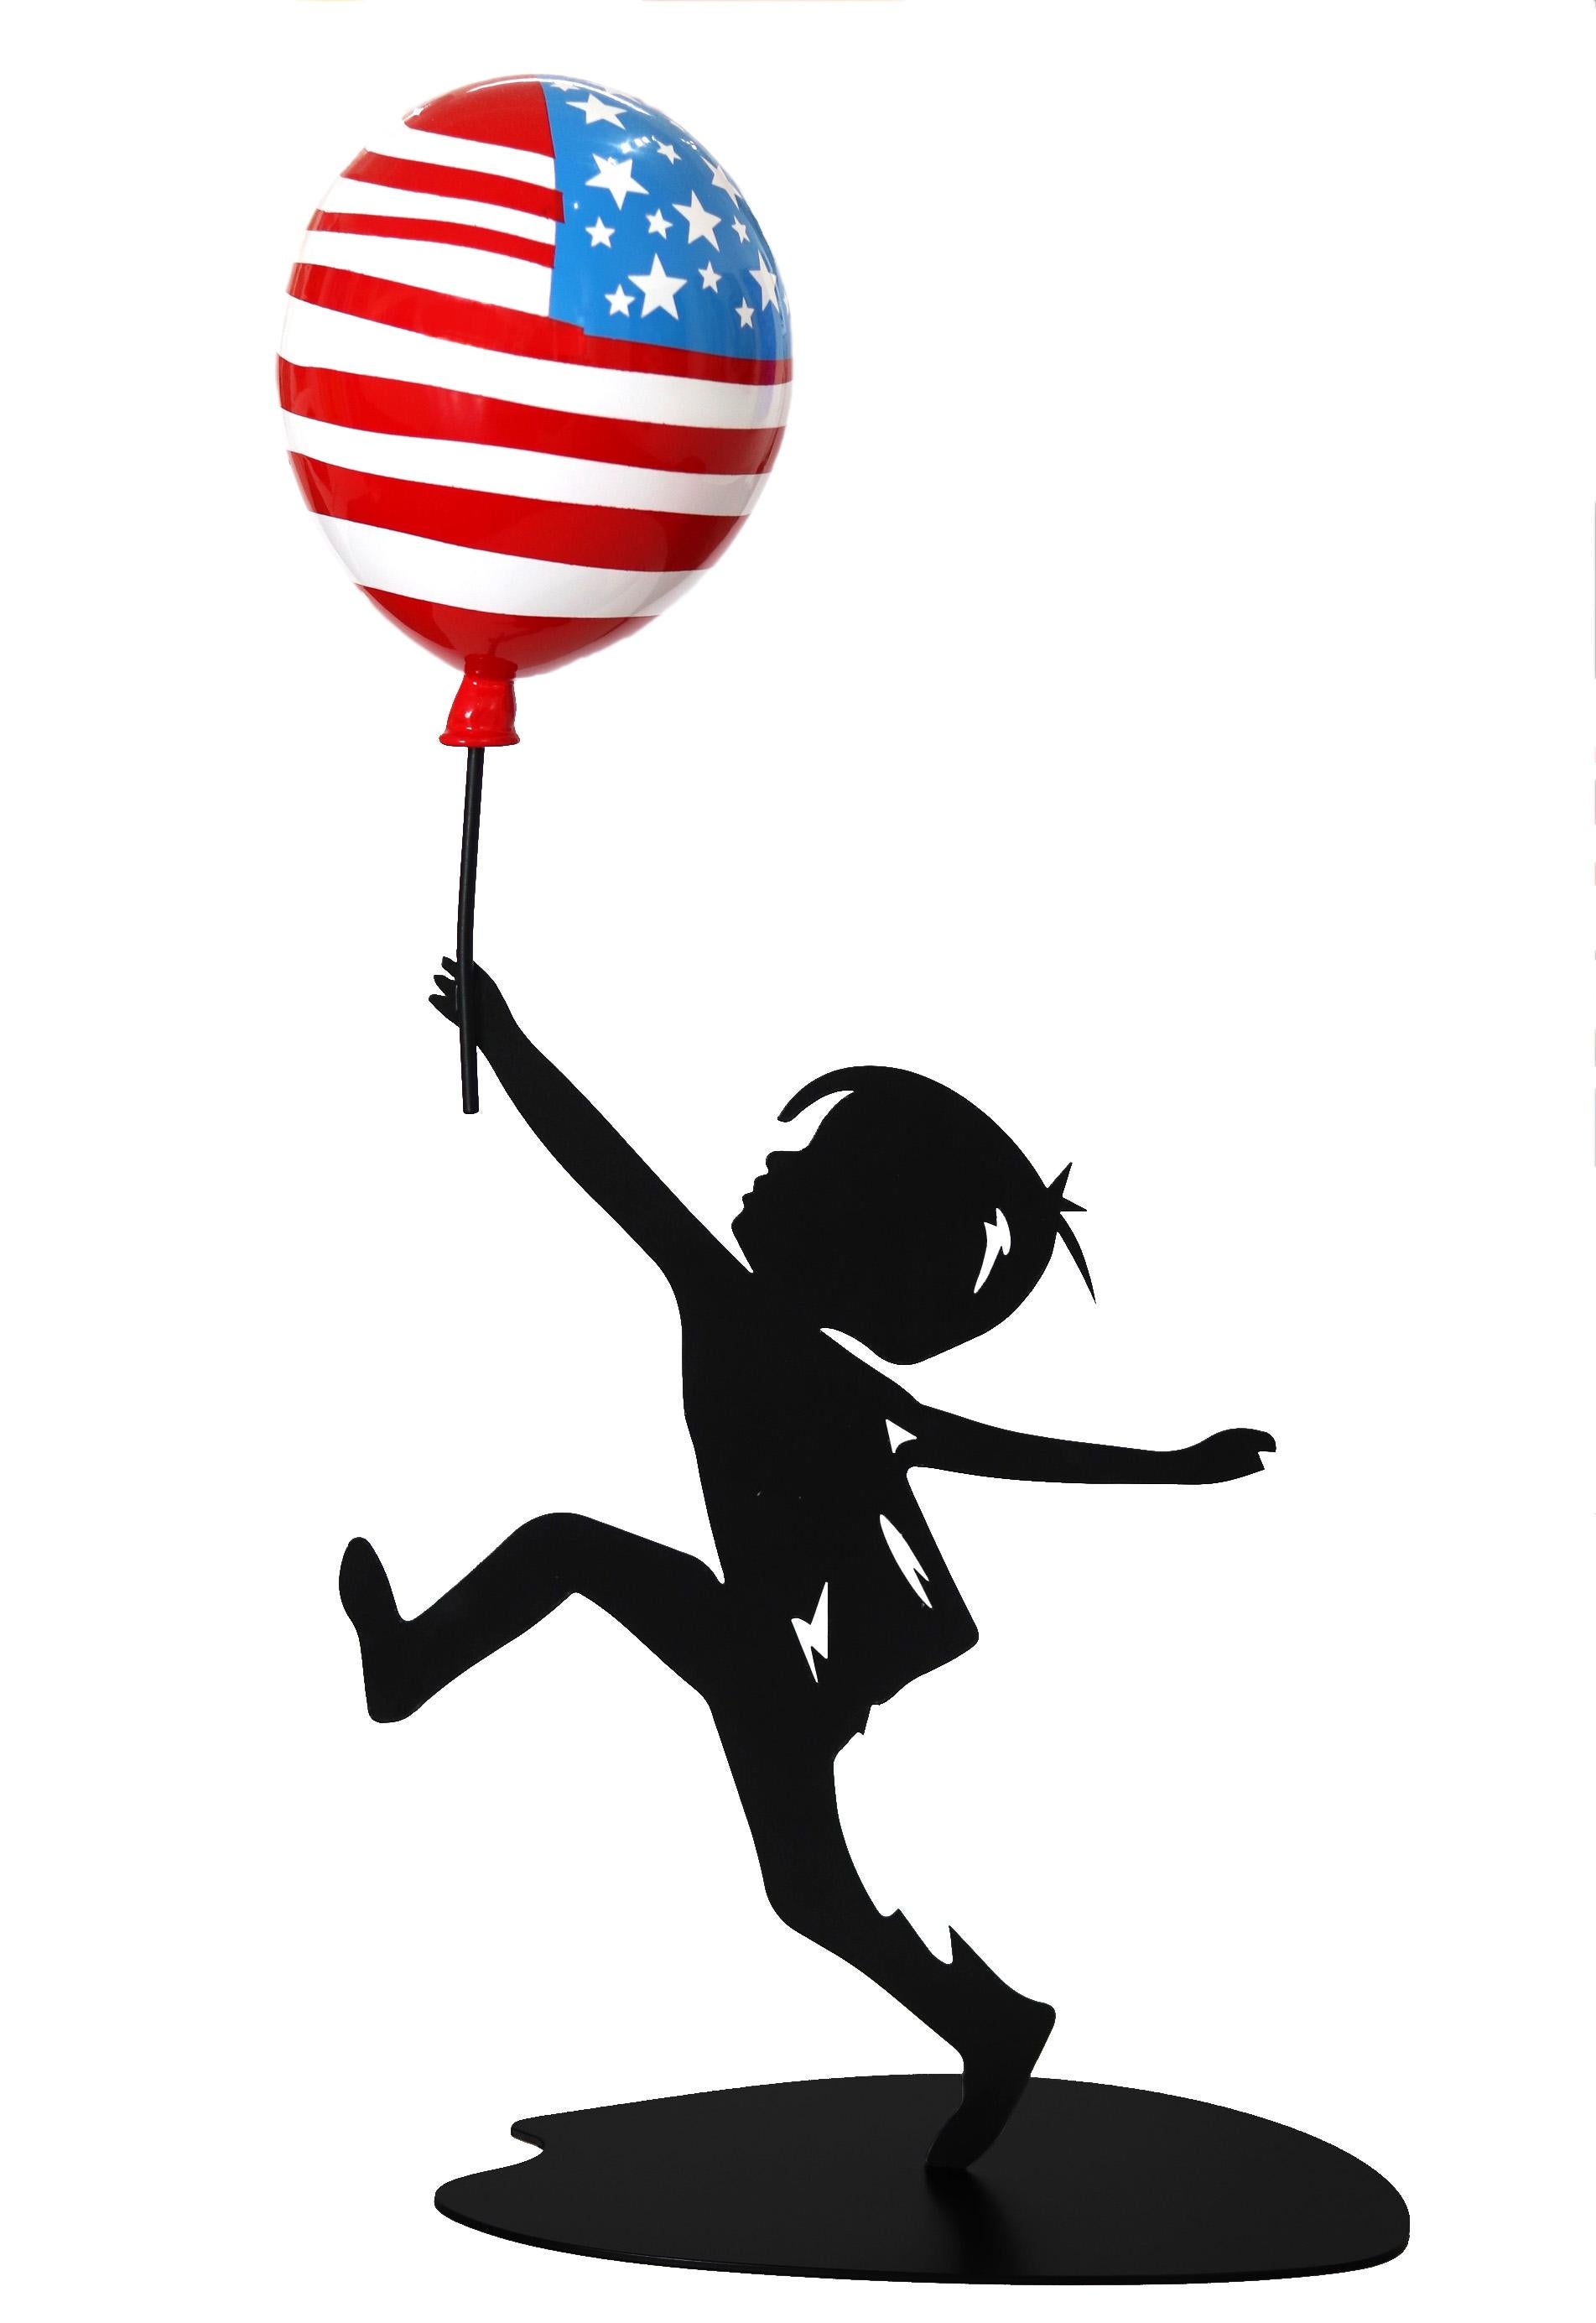 Hope USA  (3/20)  - Figurative Steel Sculpture with Glossy American Flag Balloon - Black Figurative Sculpture by Nayla Saroufim